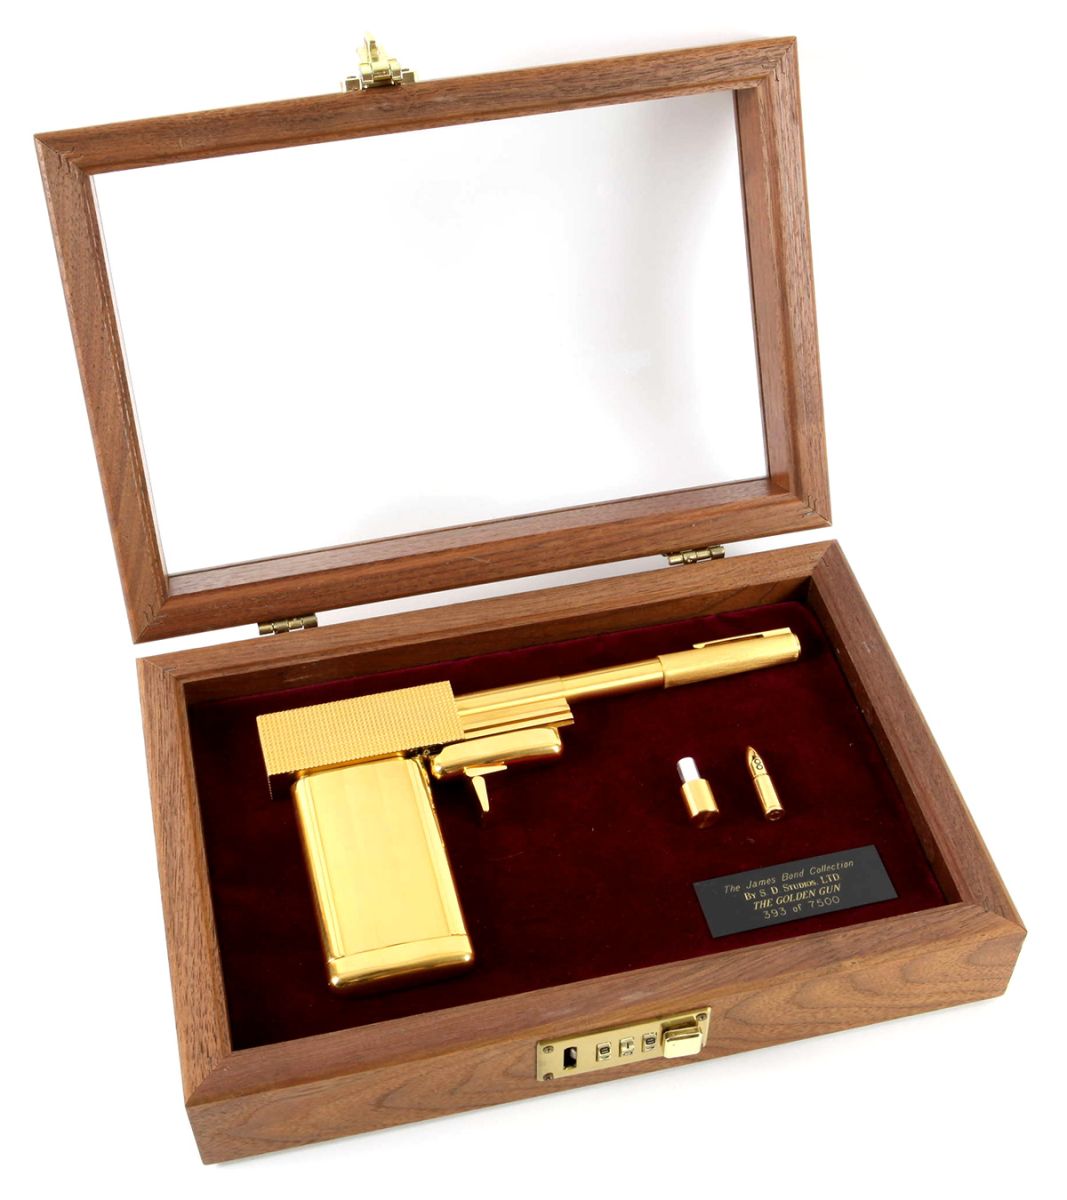 James Bond posters, books and golden gun replicas auctioned at Ewbanks ...